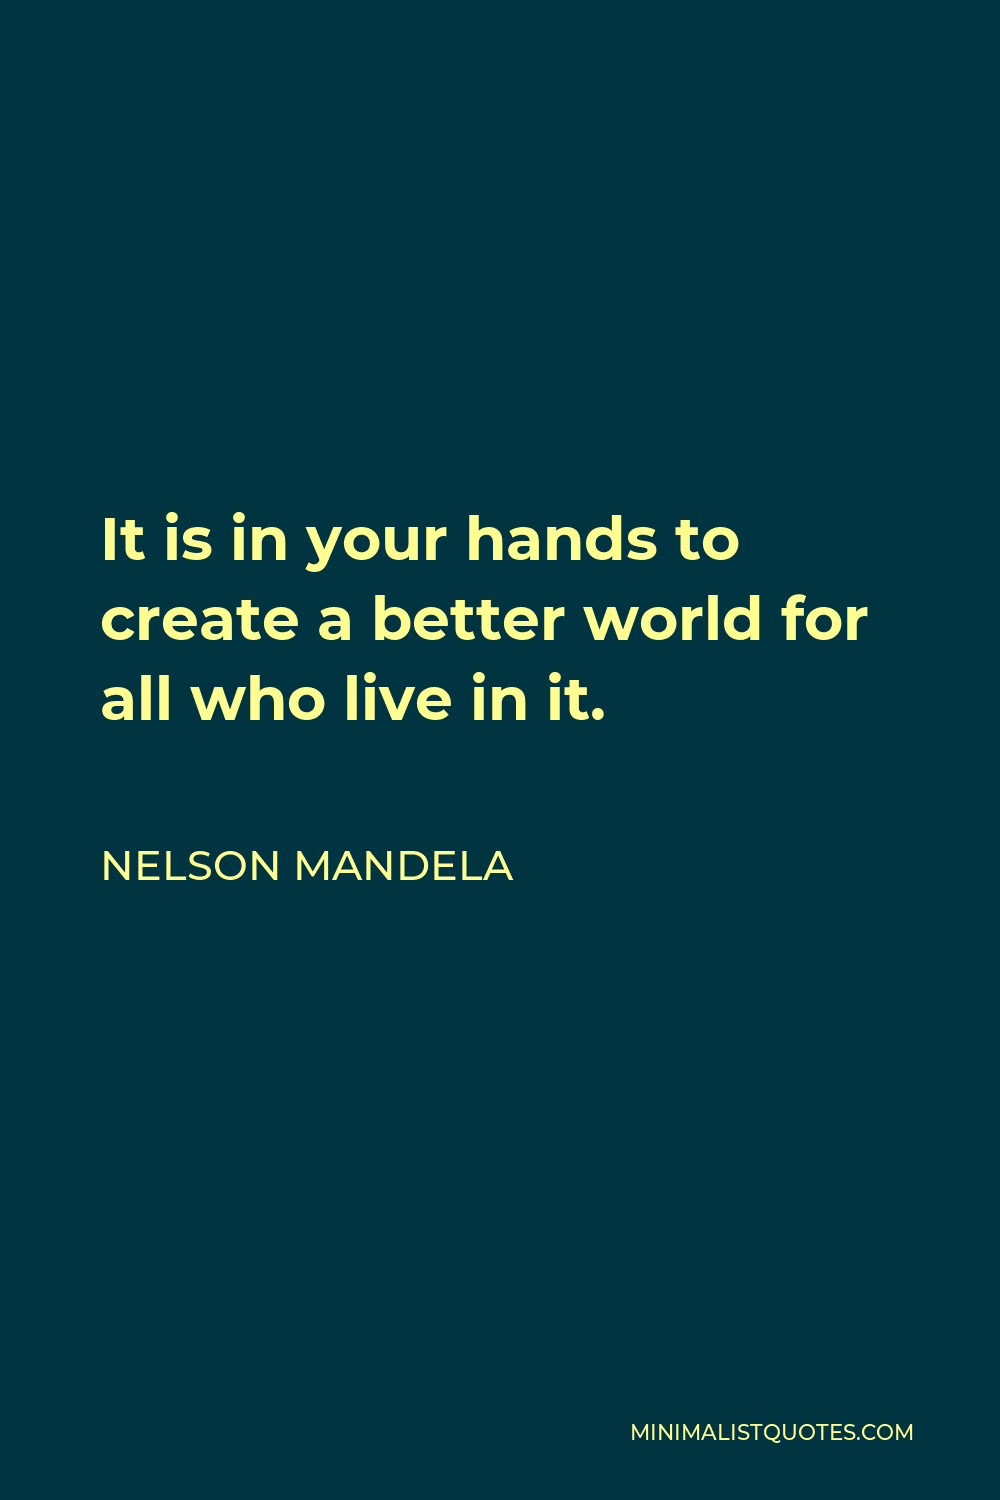 Nelson Mandela Quote: It is in your hands to create a better world for ...